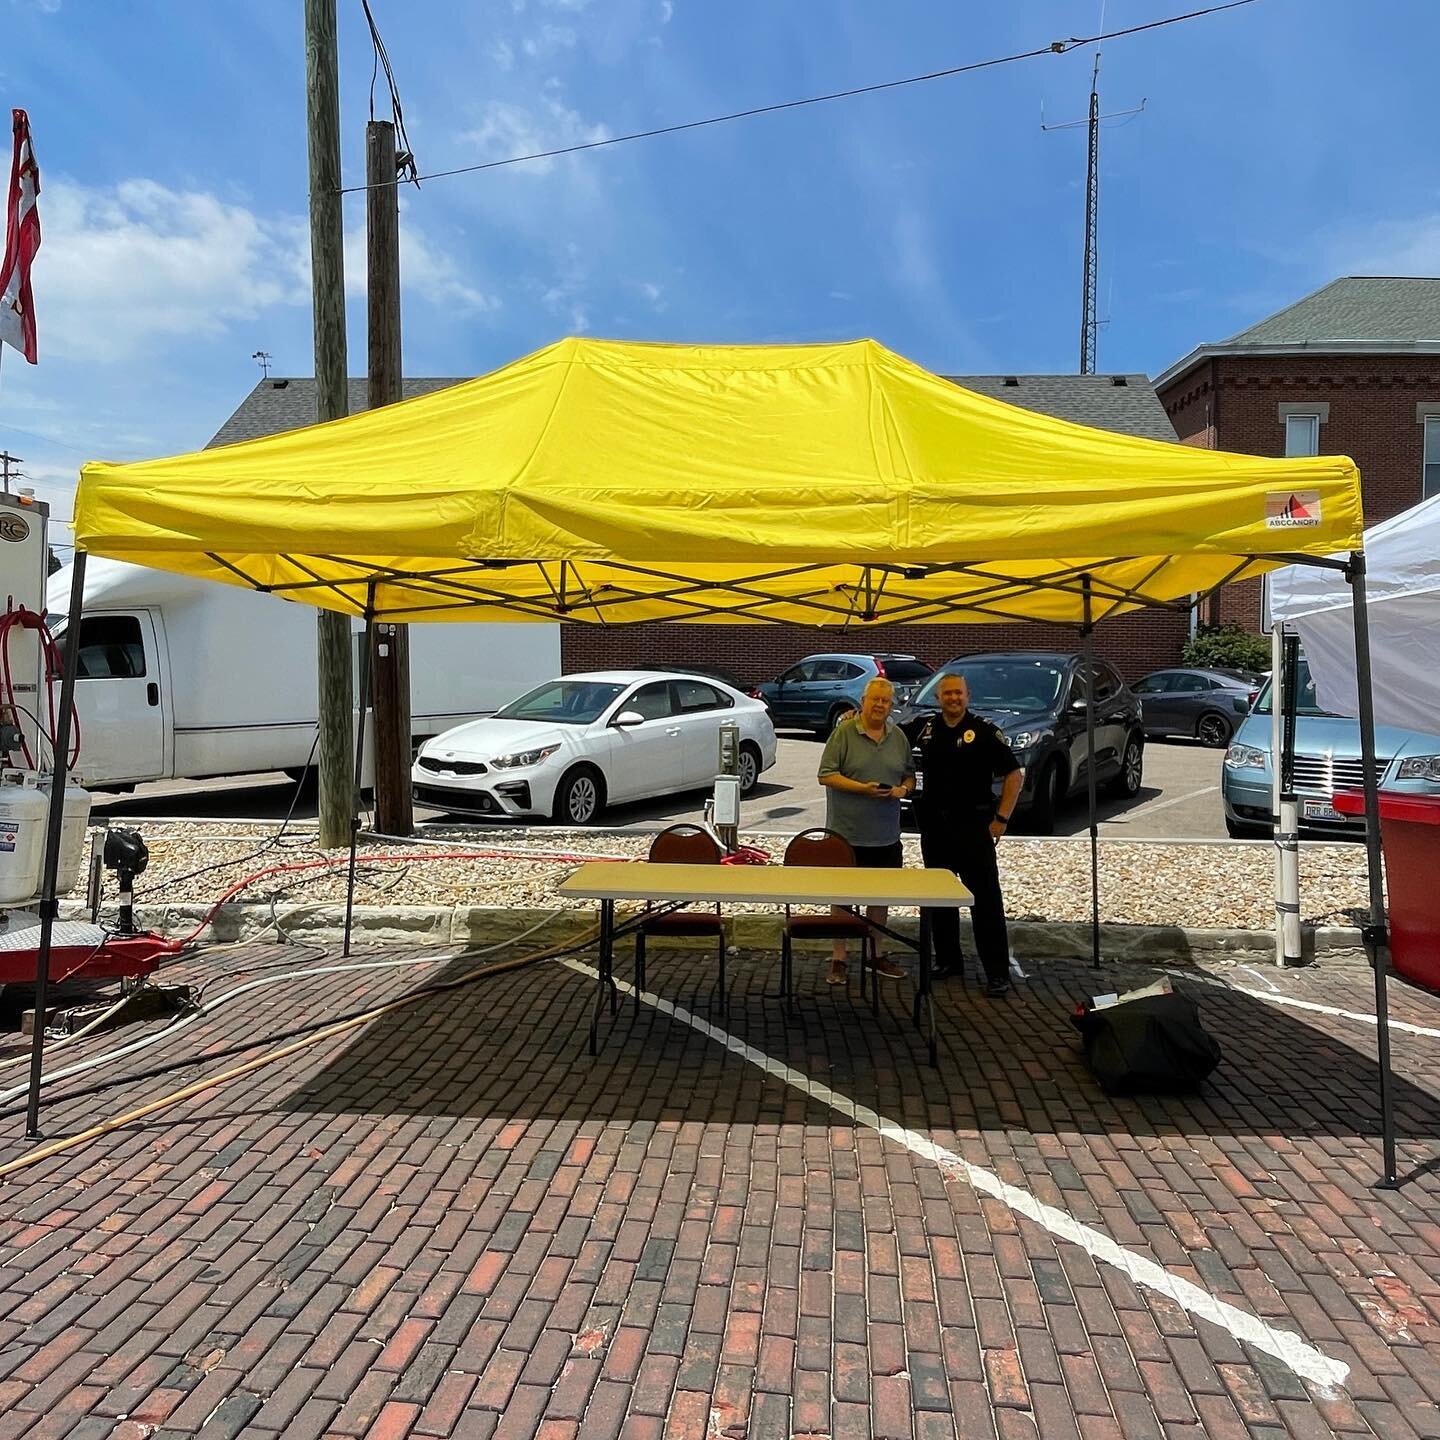 Who is ready for a hometown festival?! While you enjoy the 45th Fireman&rsquo;s Festival our officers will be around to assist if needed. New this year is our yellow tent. When not walking around, officers will be at the yellow tent to help answer qu